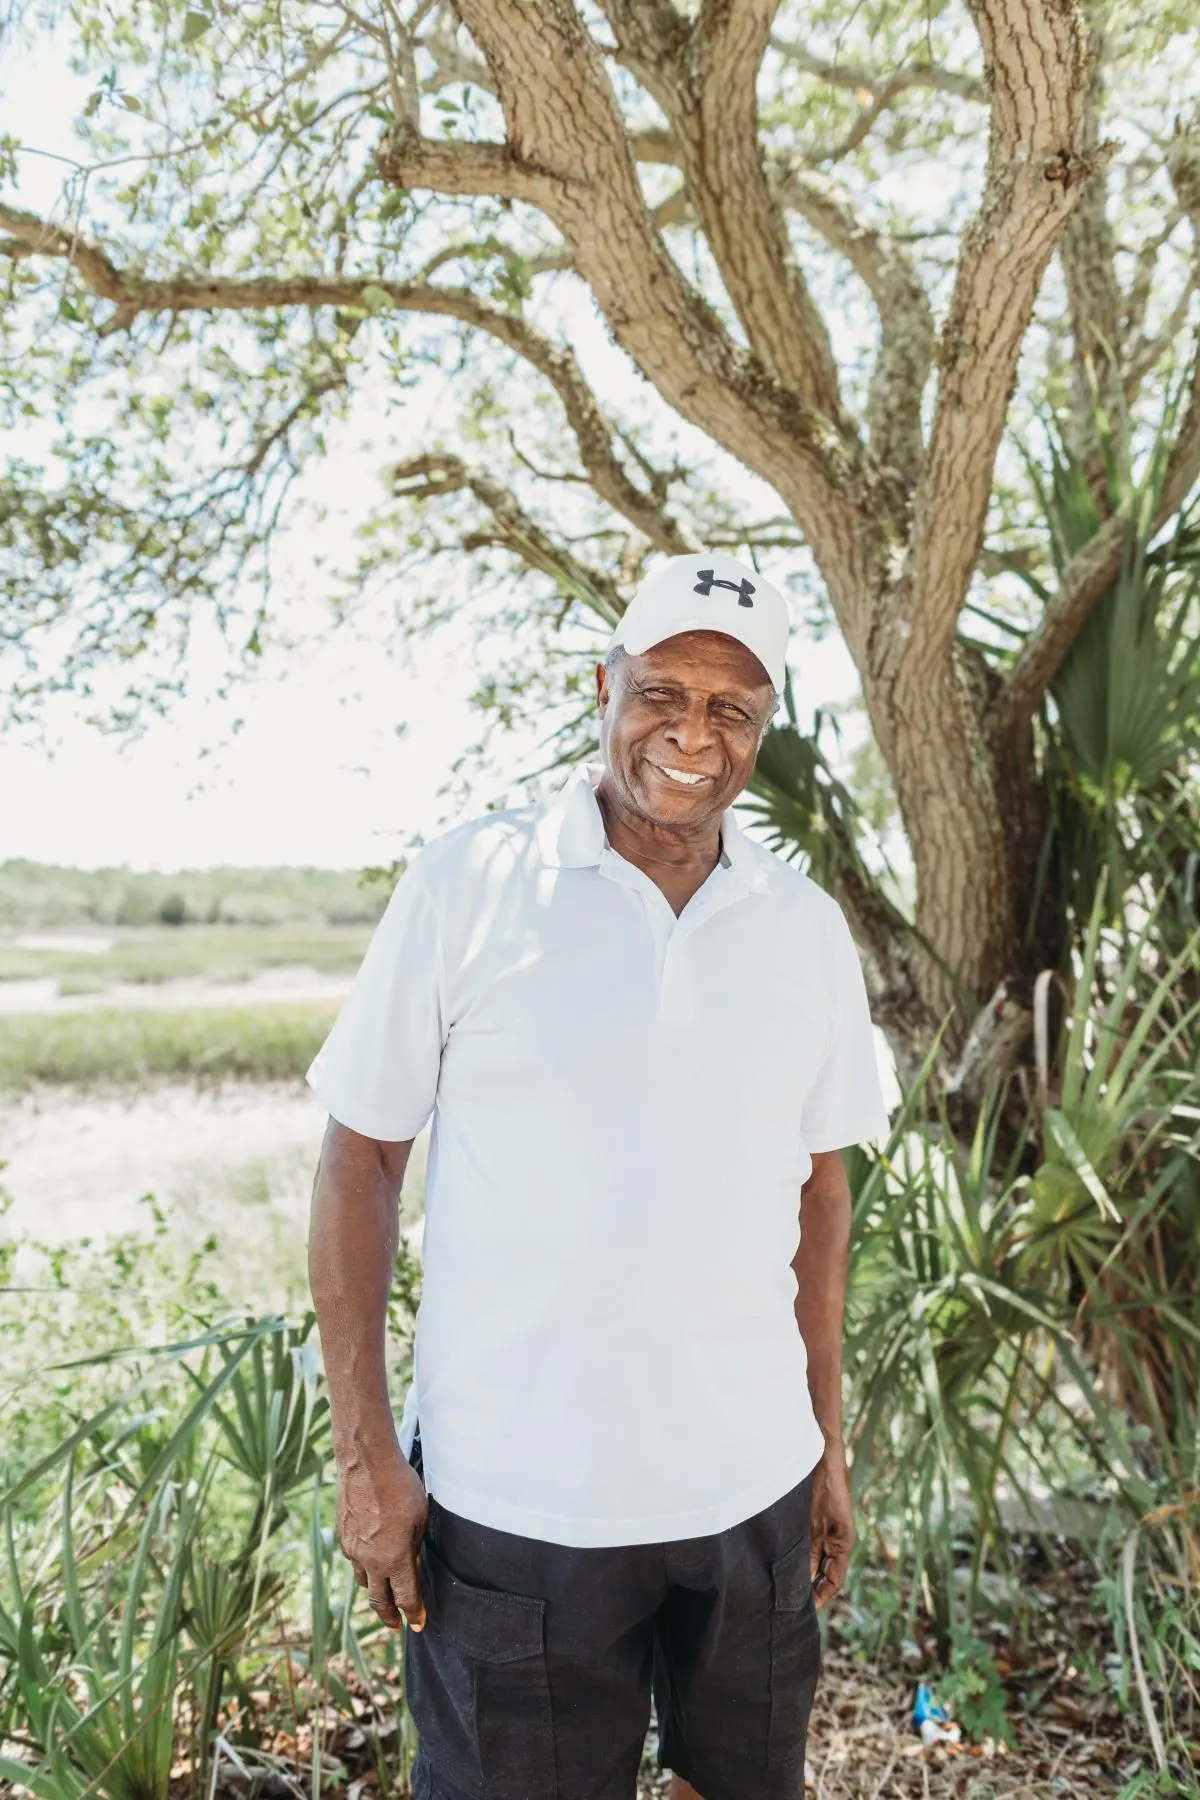 A man smiles in front of a tree on the beach.